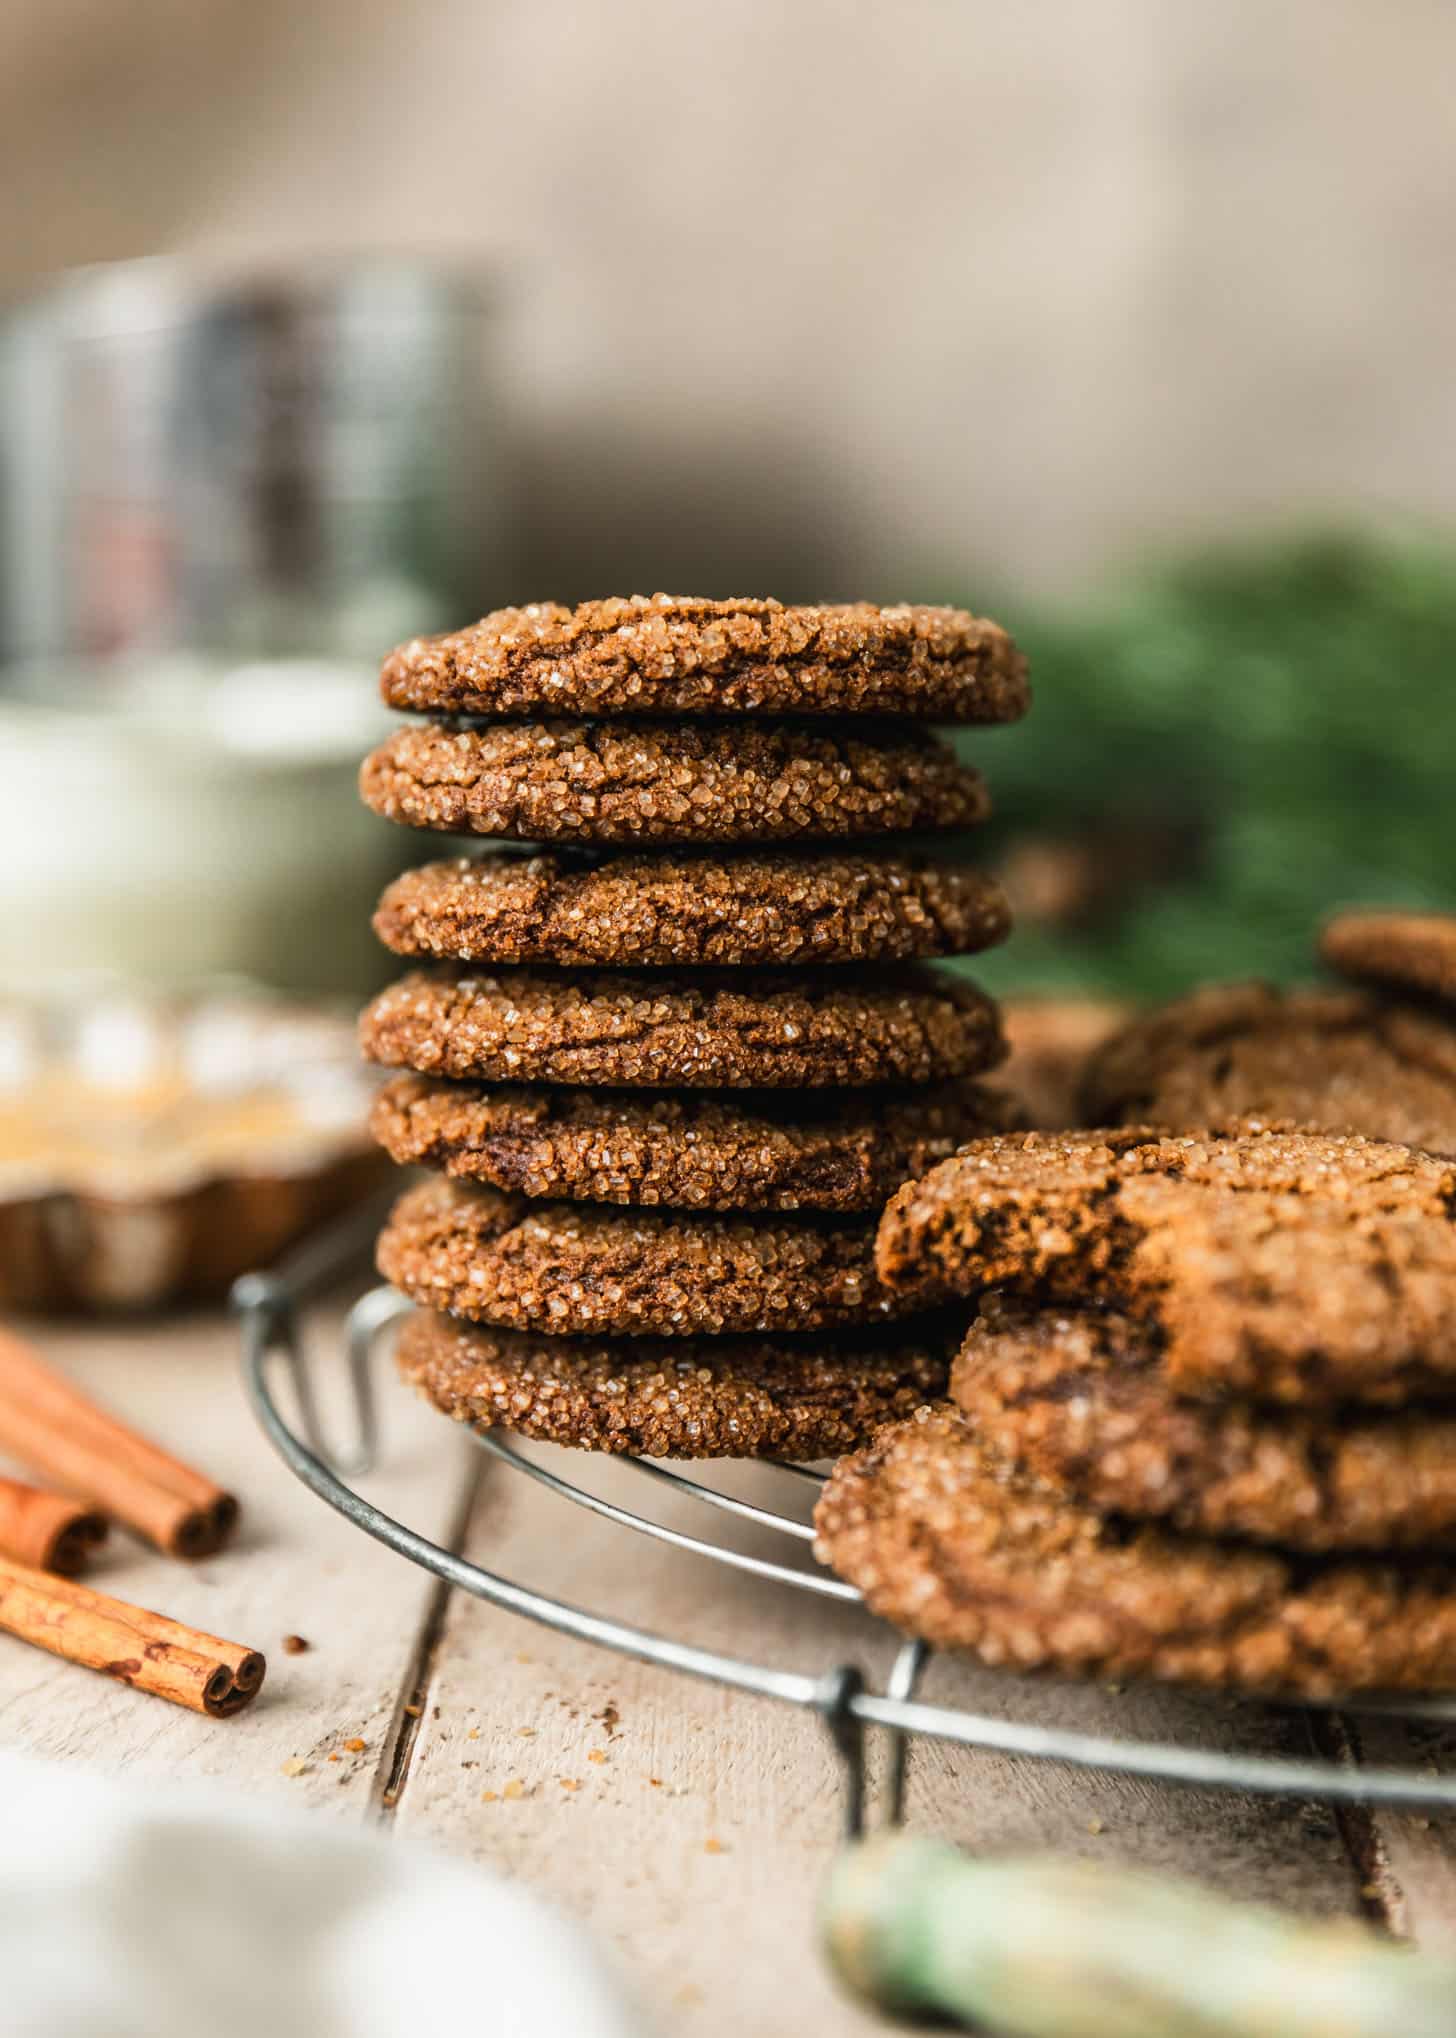 A stack of molasses crinkle cookies on a wire rack next to cinnamon sticks, garland, and a beige linen on a wood table.